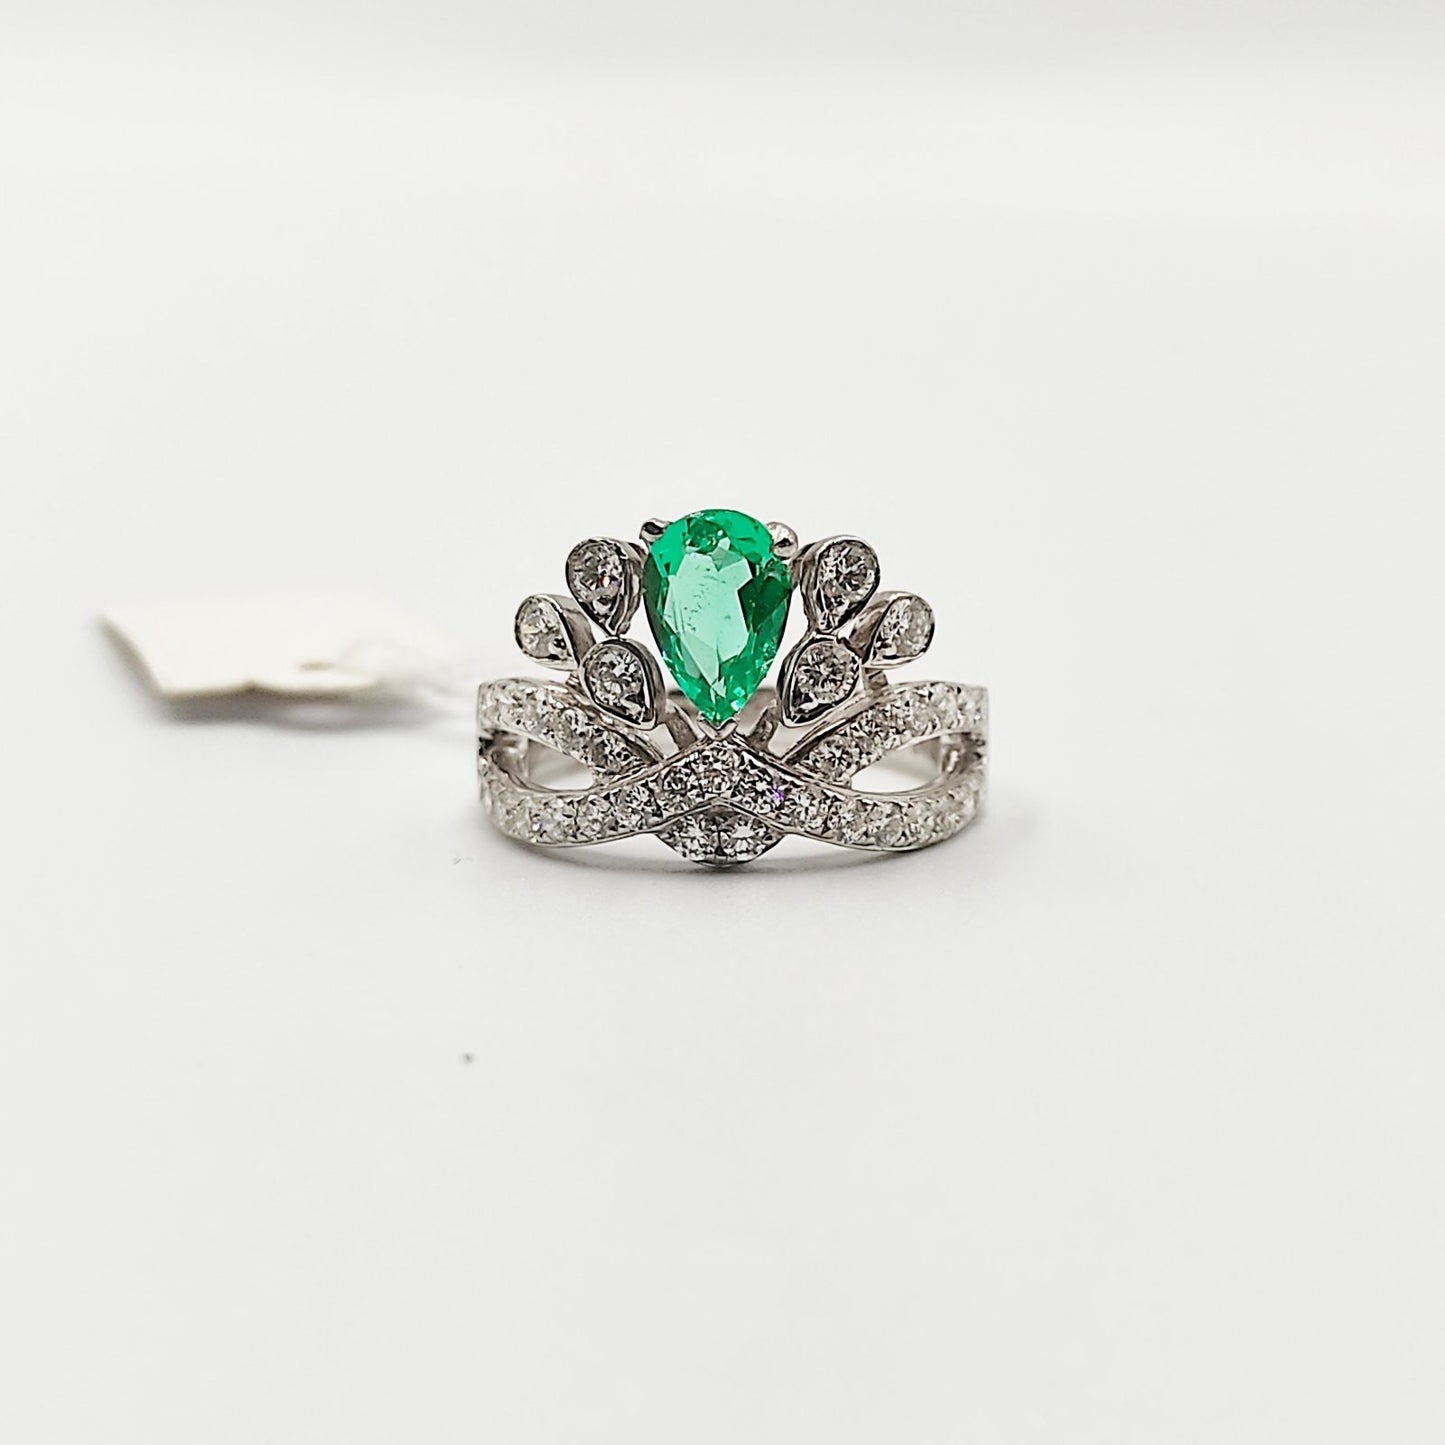 Tiara Crown Ring with Green Emerald and Diamonds 18K Gold